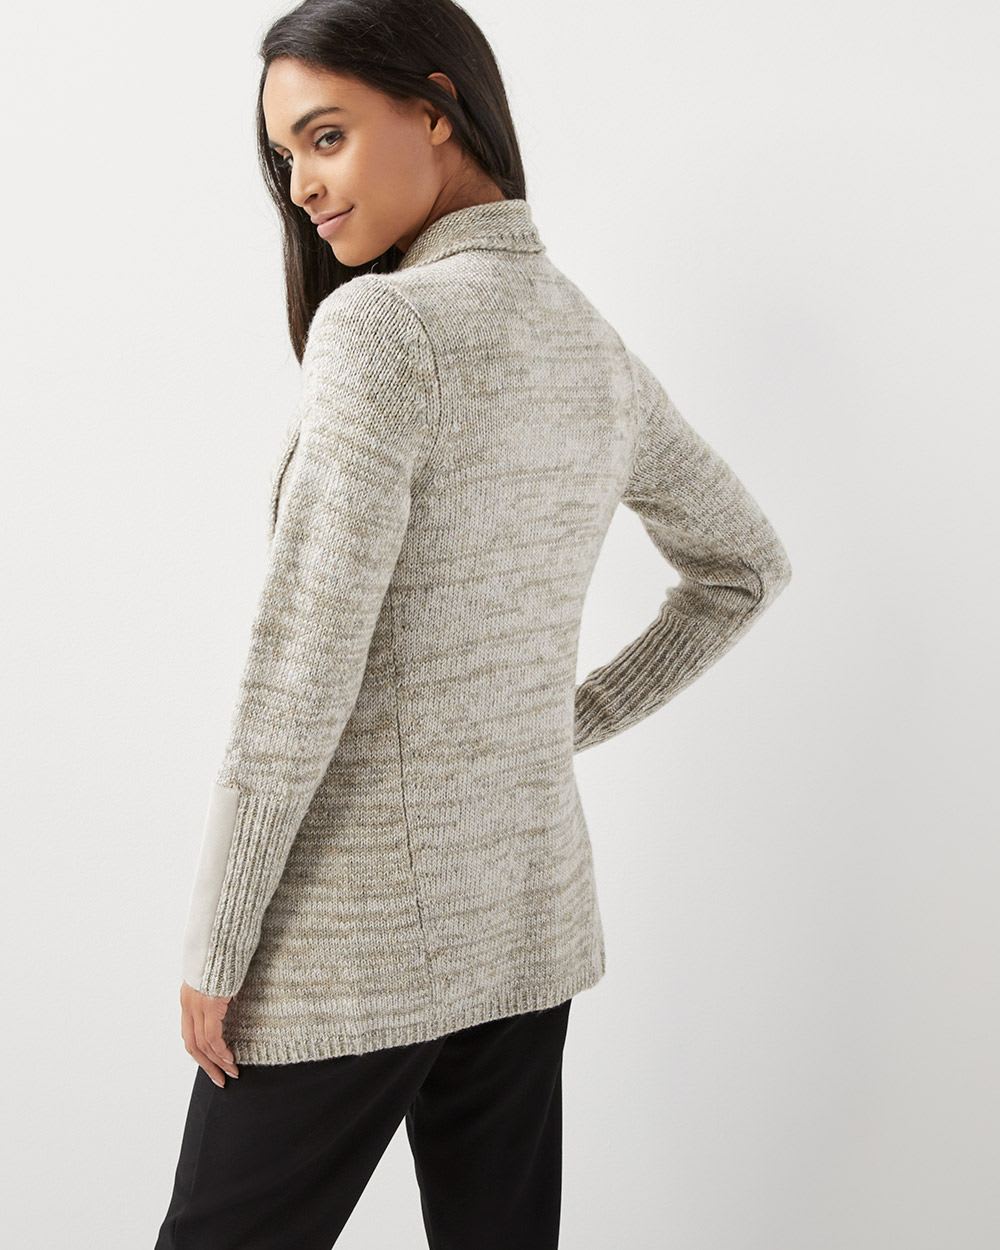 C&G Nep-yarn Cardigan with faux suede sleeves | RW&CO.